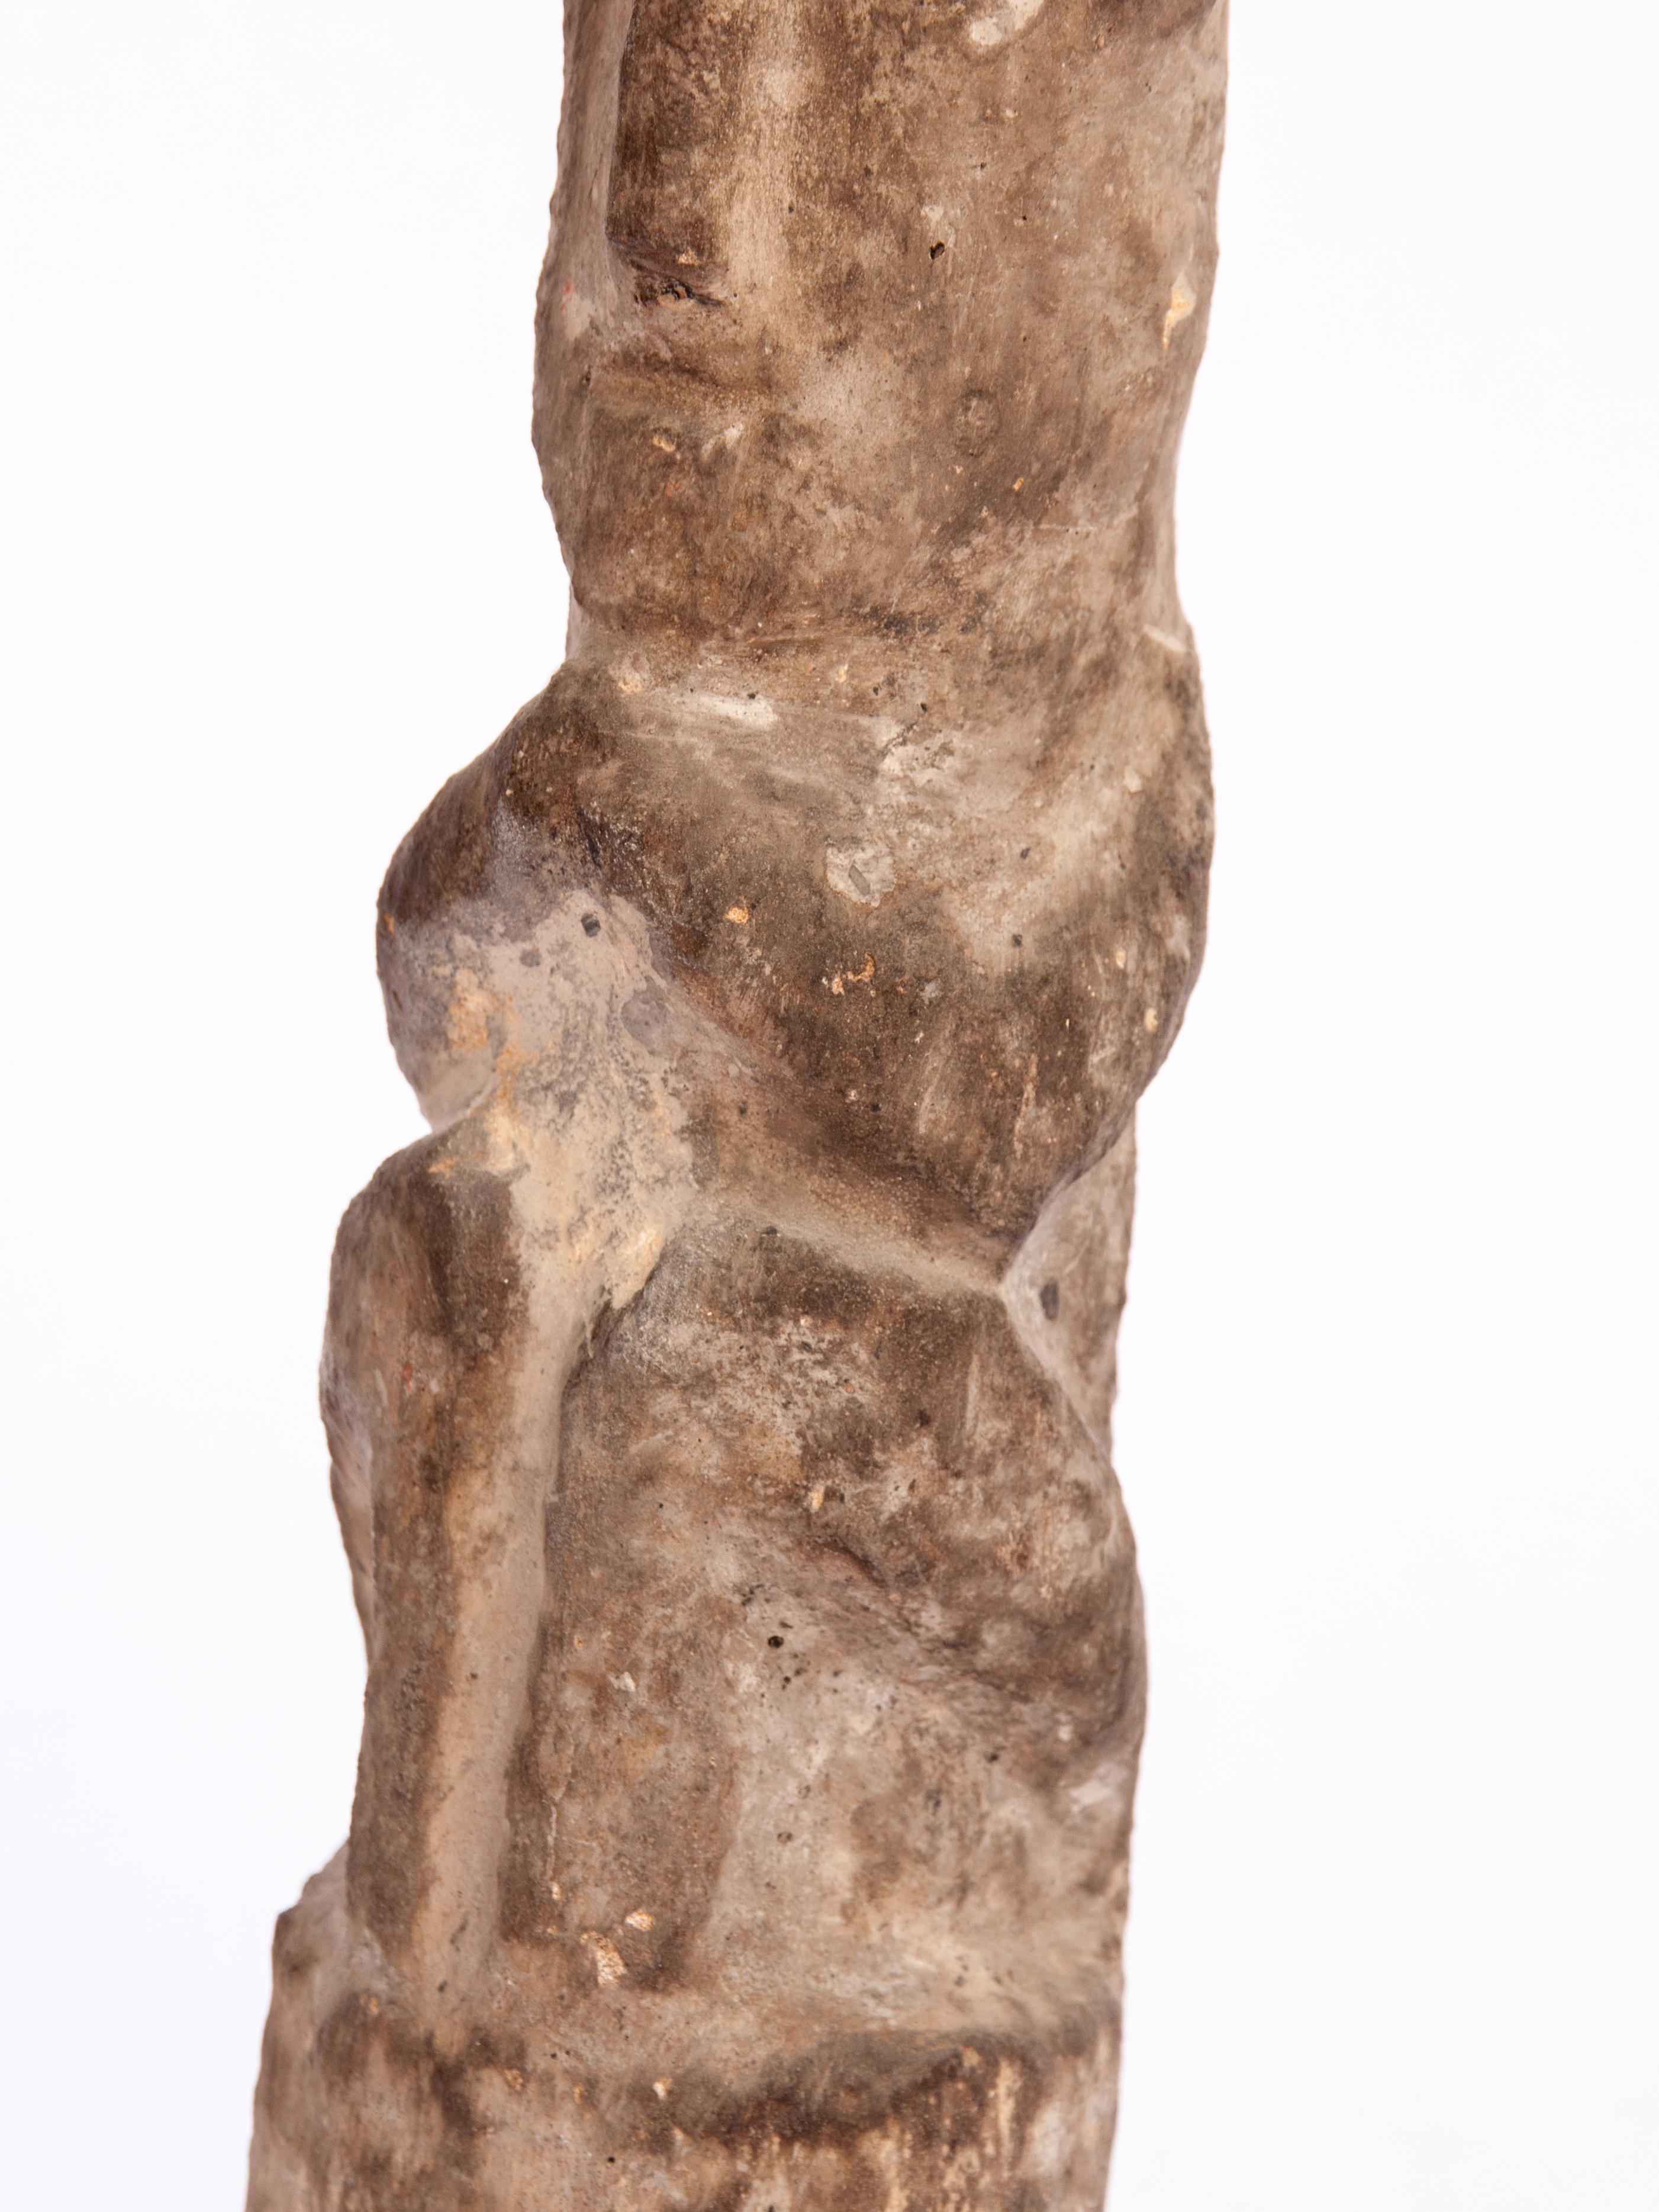 Tribal Stone Figure from West Nepal, Early to Mid-20th Century 7